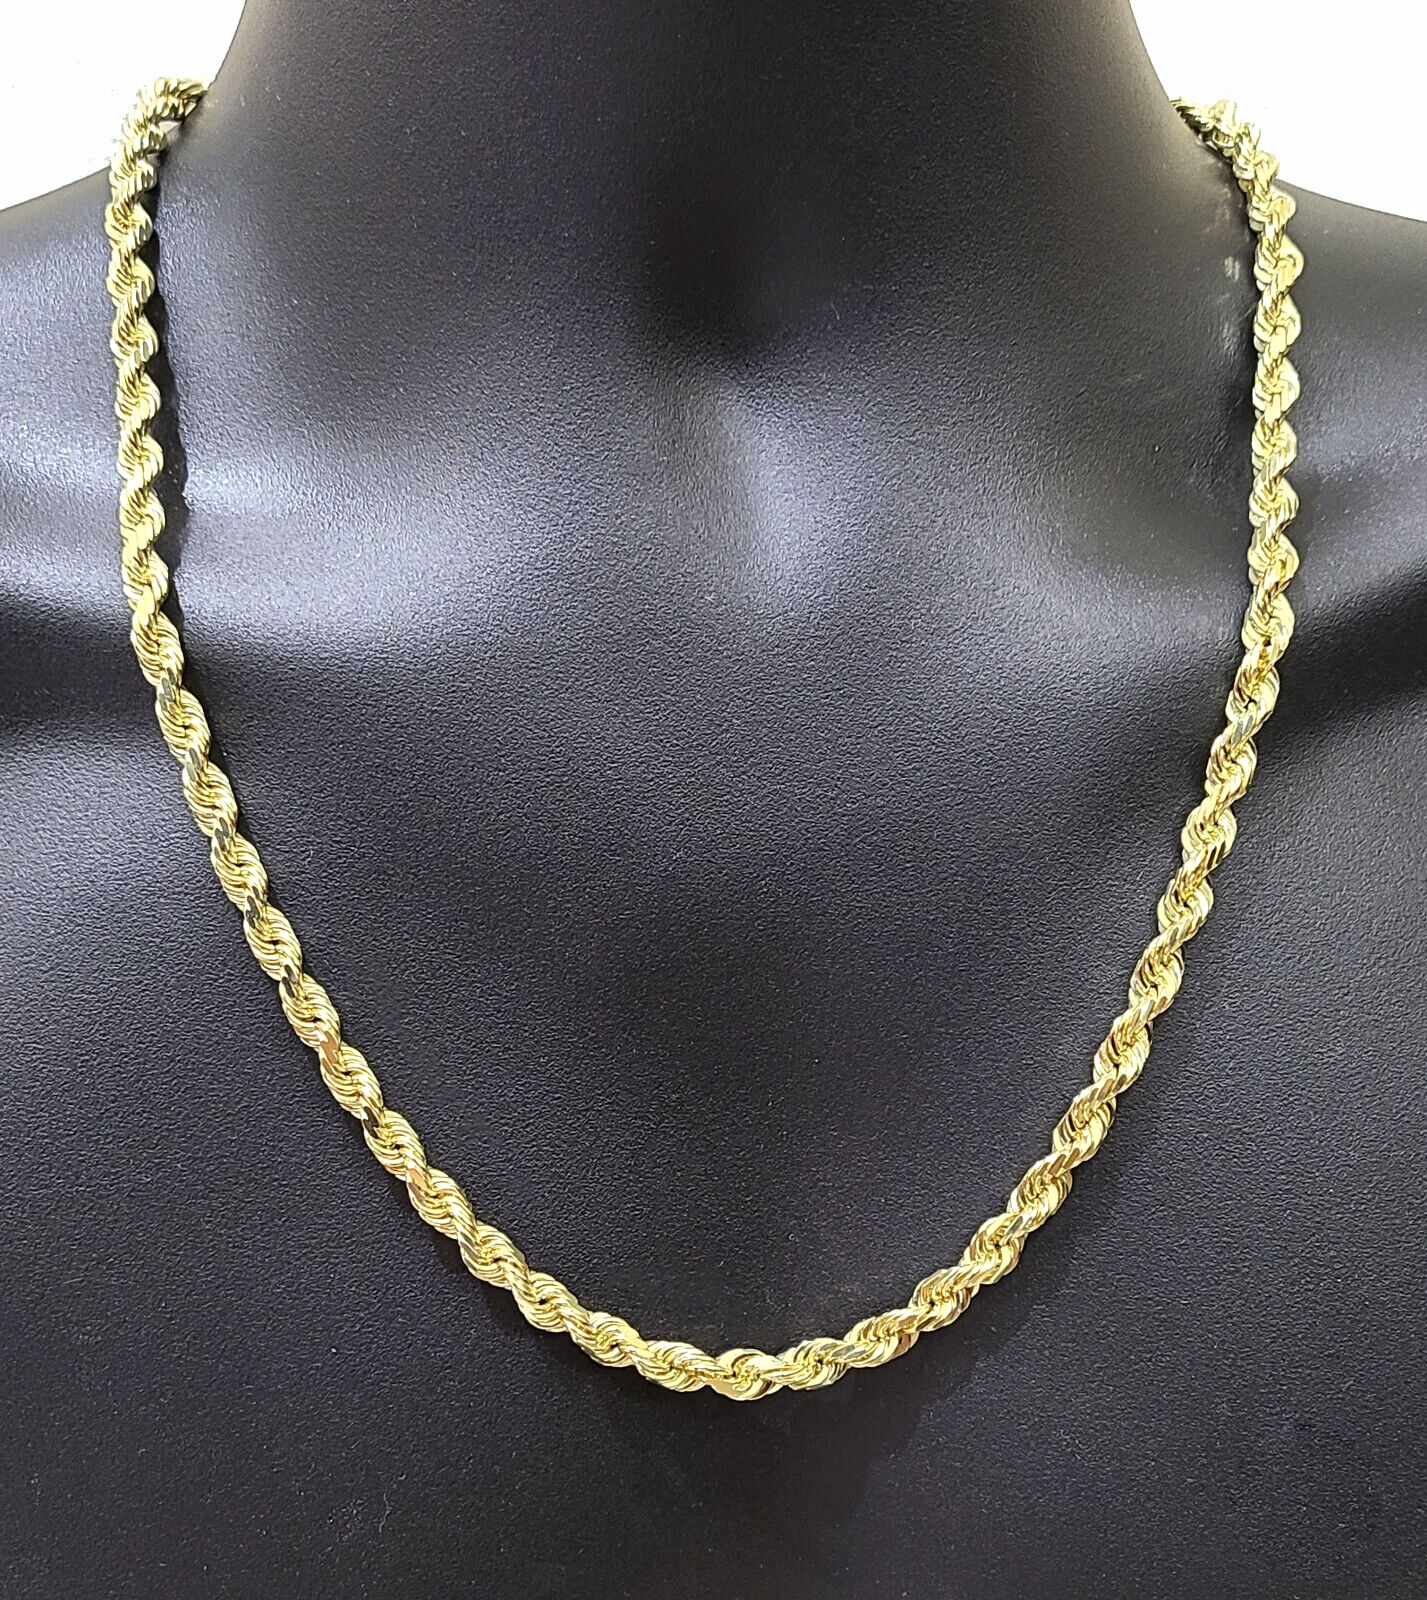 Flower Link Chain Necklace I Nautical Treasure Jewelry 10K Gold / 24 / Flower Link (6mm) by Nautical Treasure Jewelry